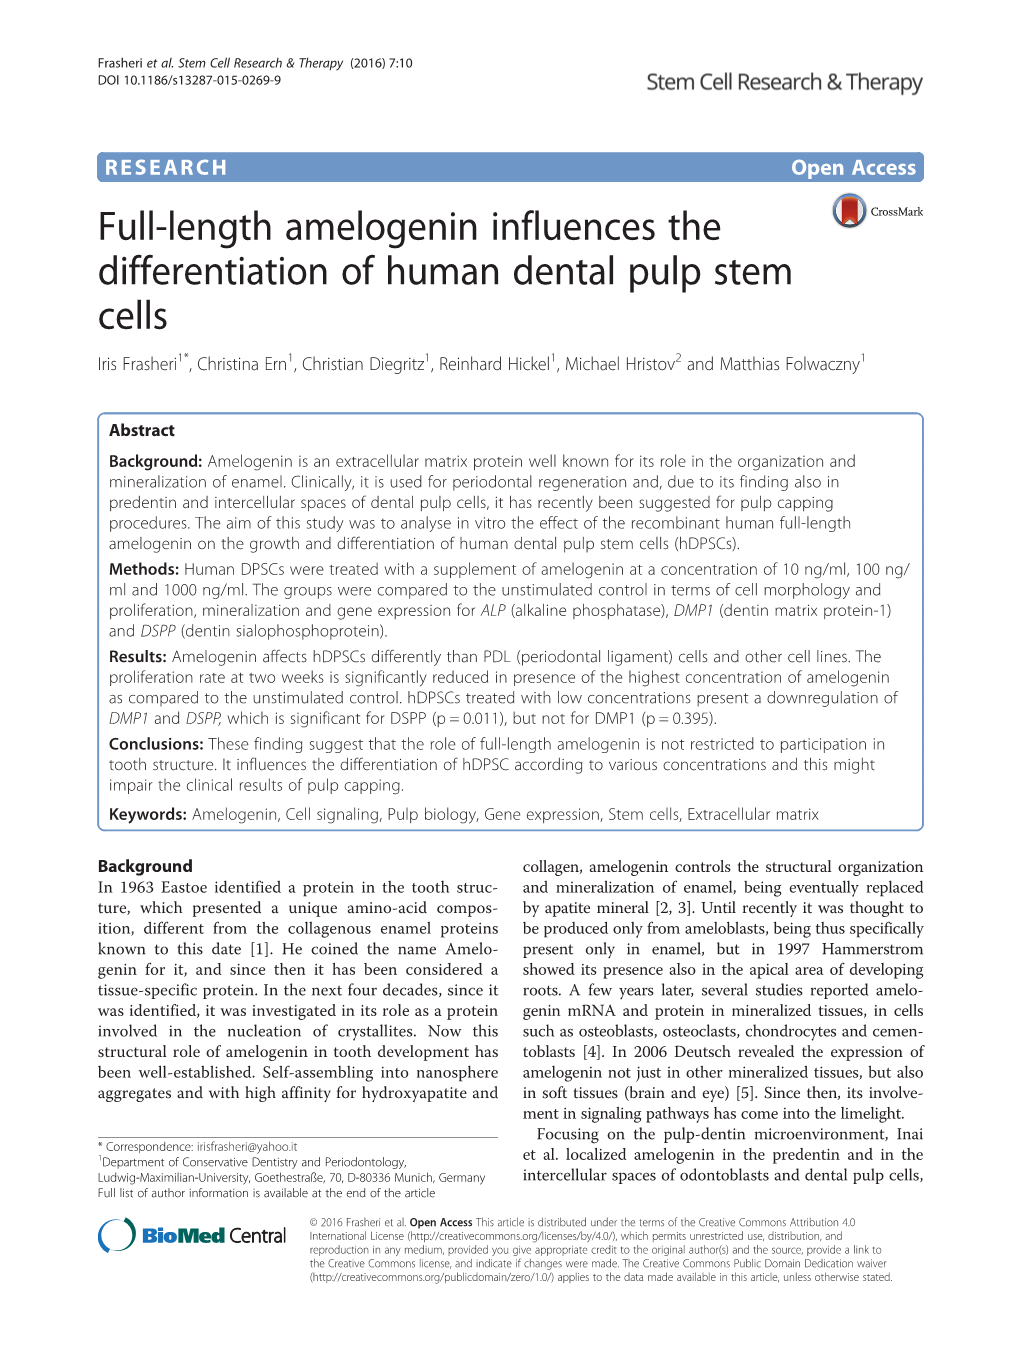 Full-Length Amelogenin Influences the Differentiation of Human Dental Pulp